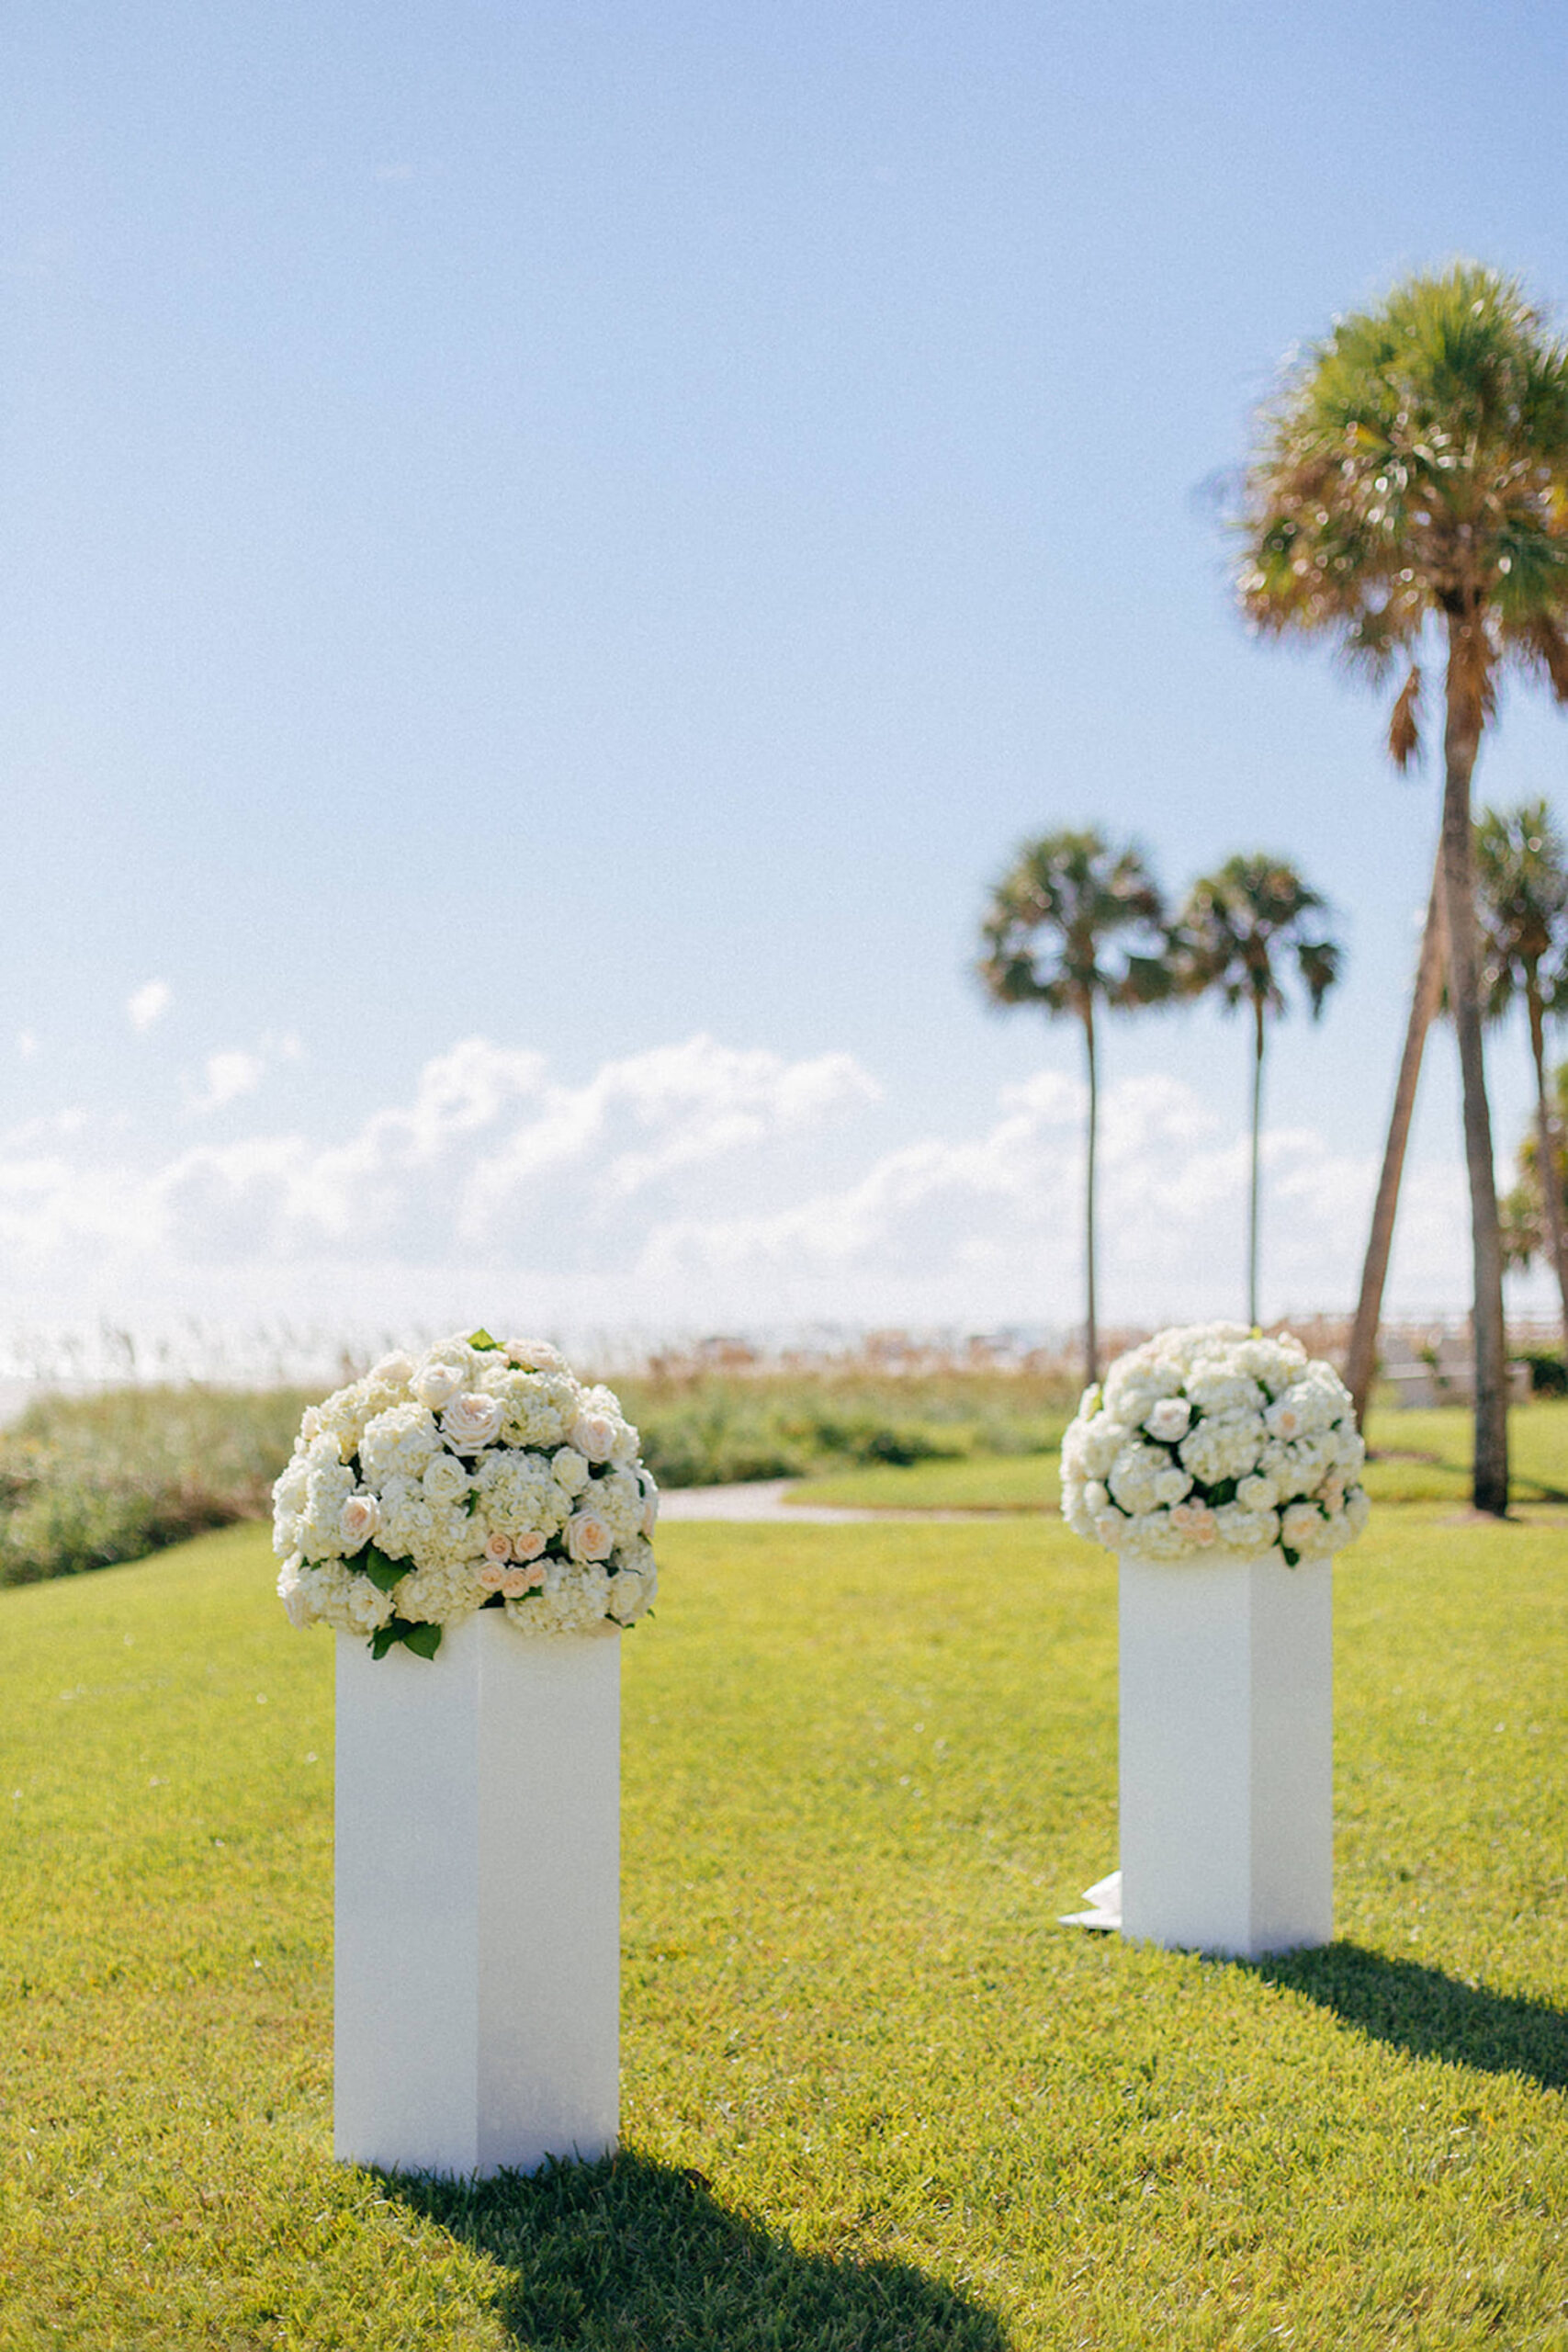 Waterfront Modern Elegant Wedding Ceremony Decor, Two White Pedestals with Round Classic White Roses Floral Arrangements | Tampa Bay Wedding Venue The Resort at Longboat Key Club